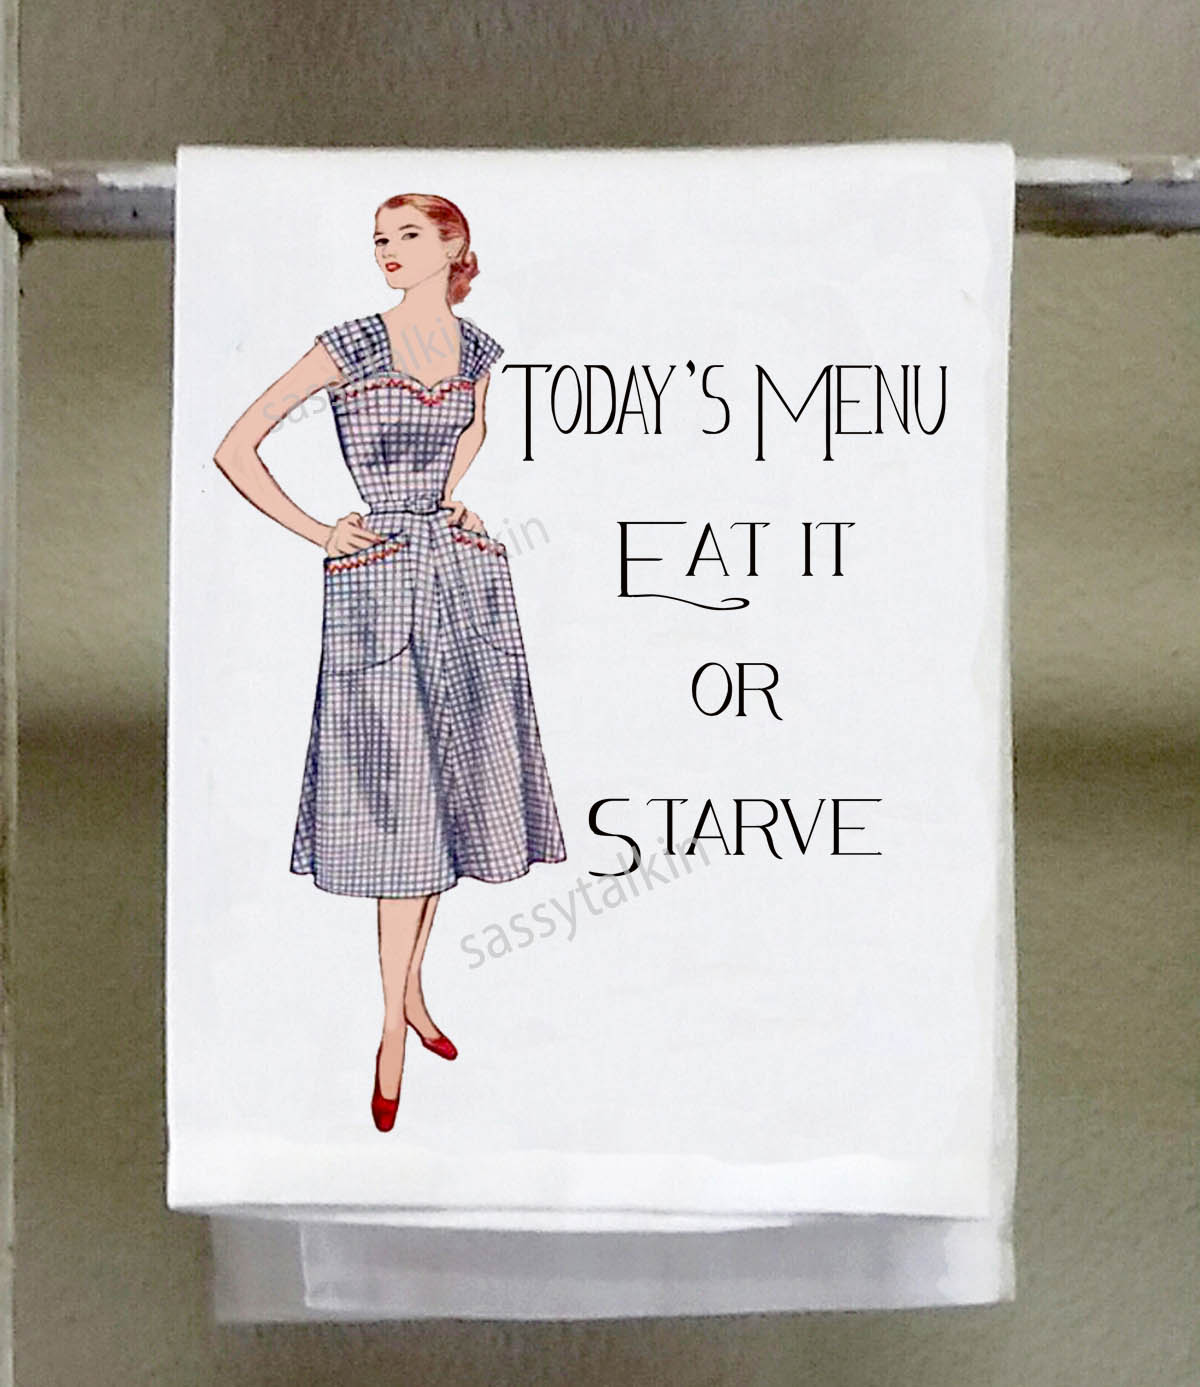 Sassy Girl, Today's Menu eat it or starve